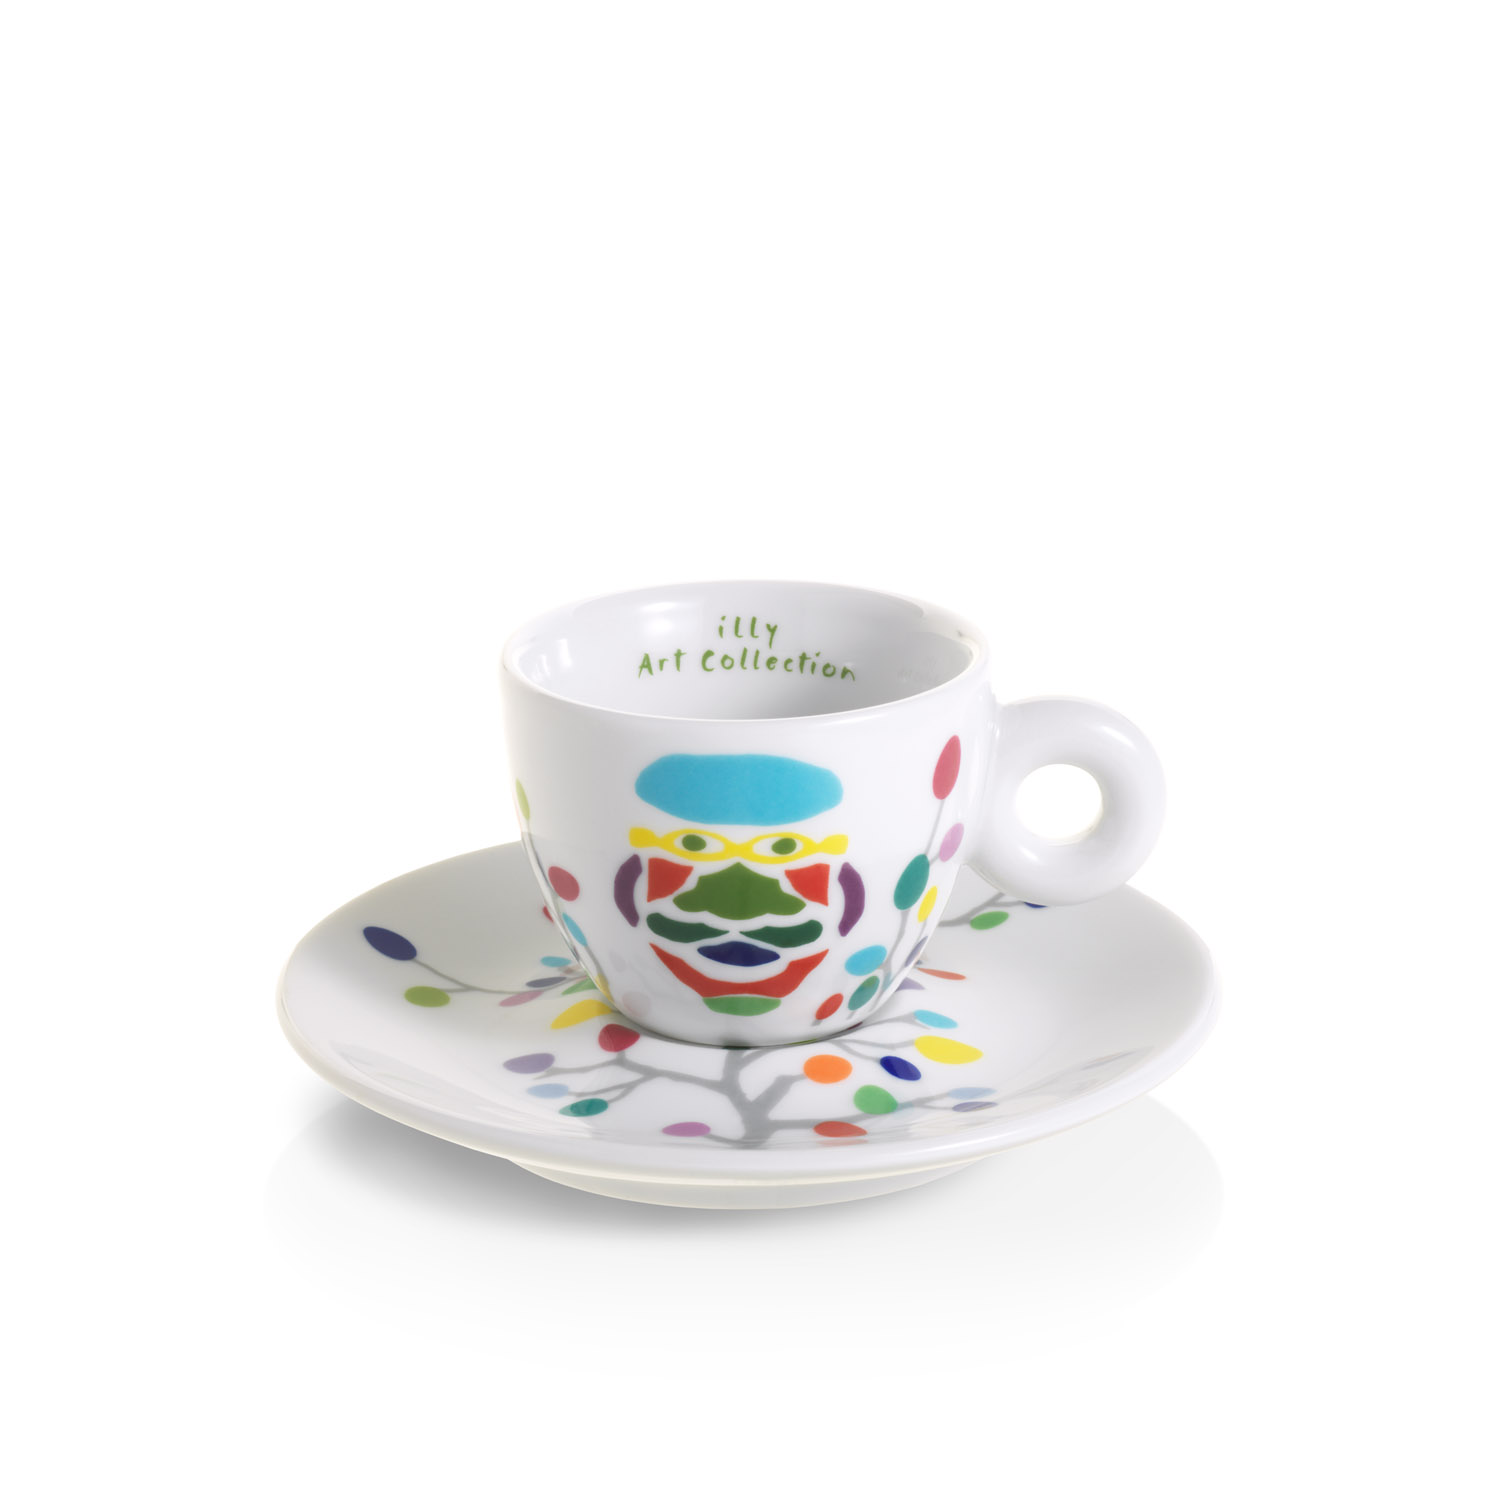 illy Art Collection PASCALE MARTHINE TAYOU Σετ Δώρου 6 Espresso Cups, Φλιτζάνια , 02-02-6090